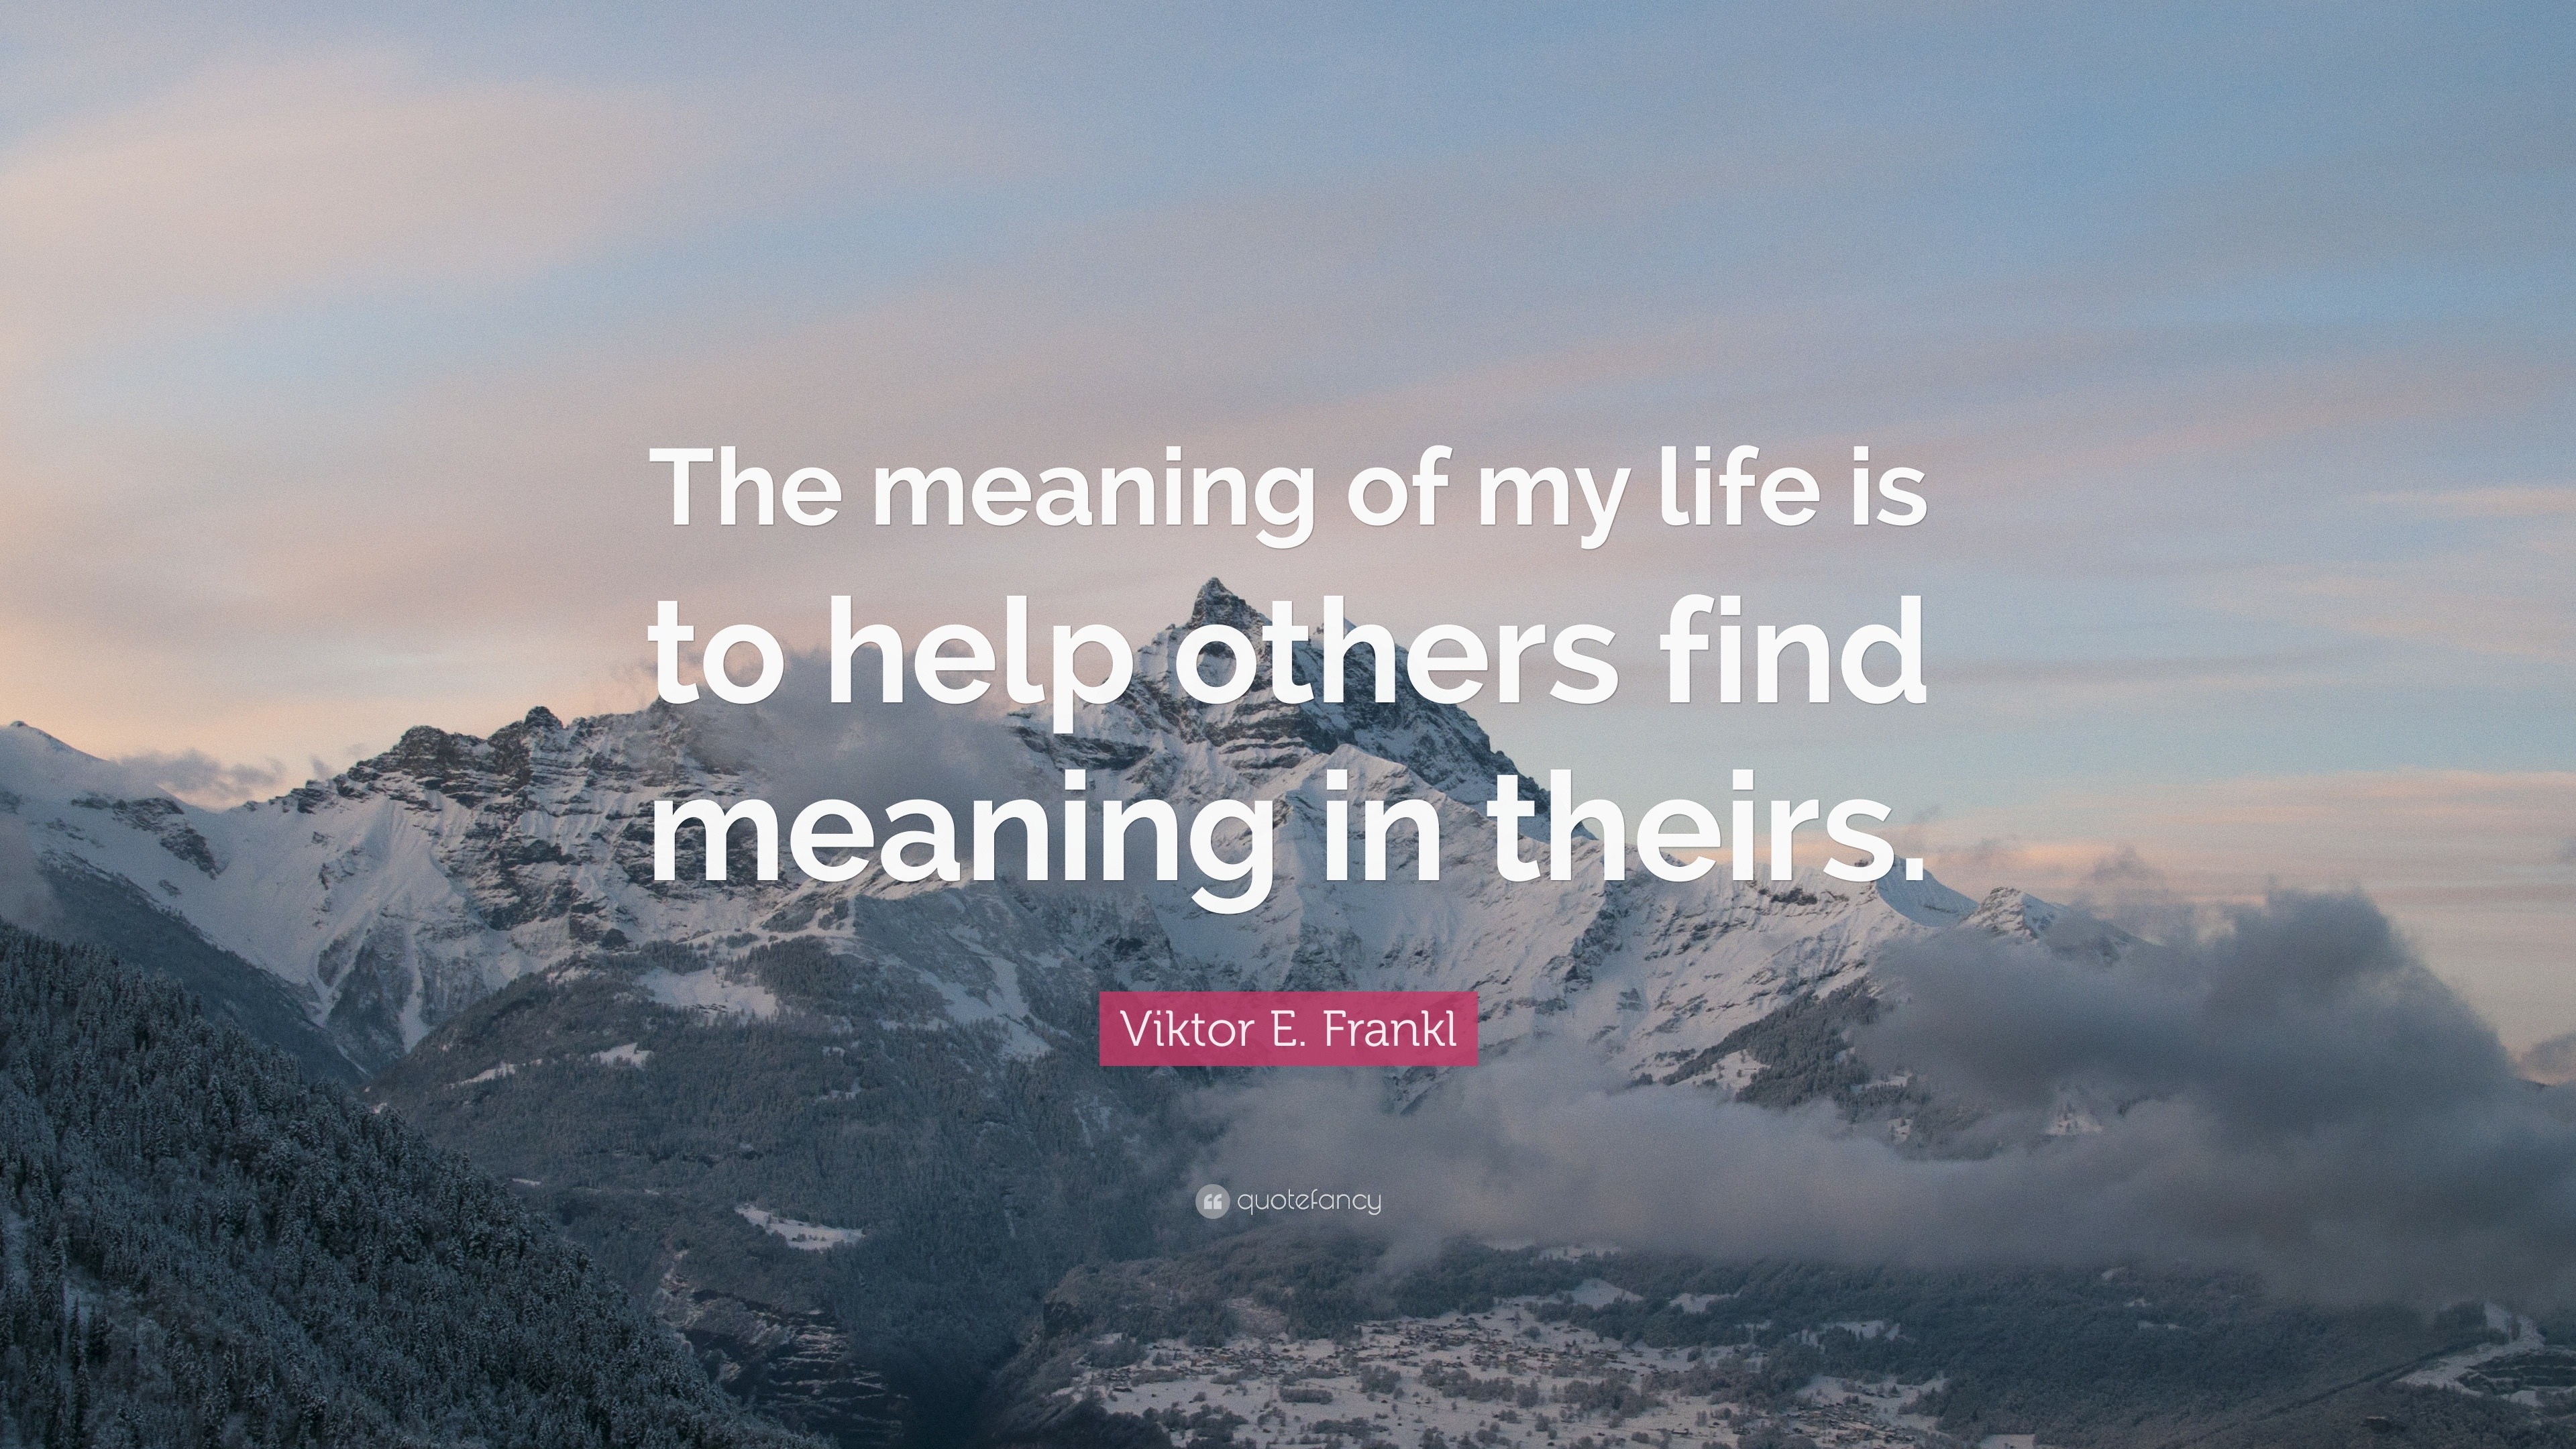 Viktor E Frankl Quote “The meaning of my life is to help others